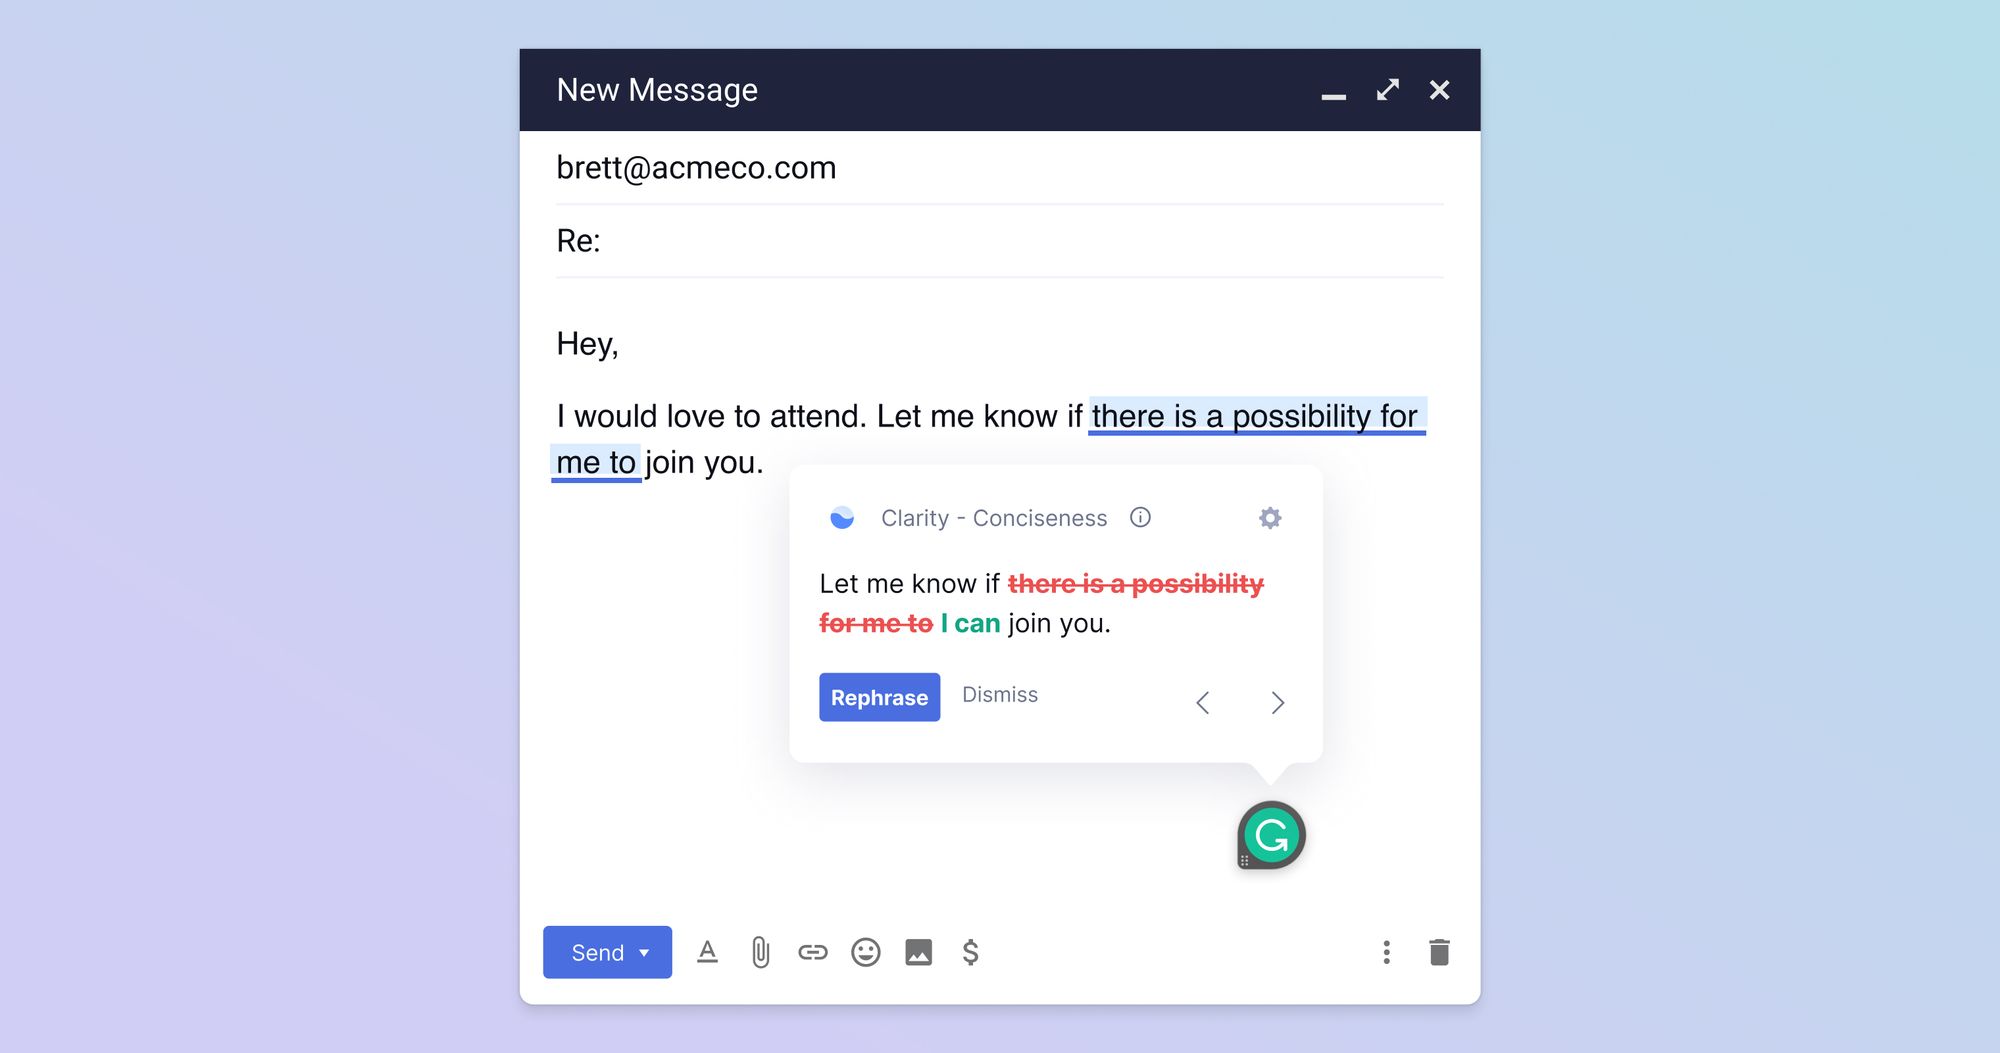 Grammarly integration with Gmail